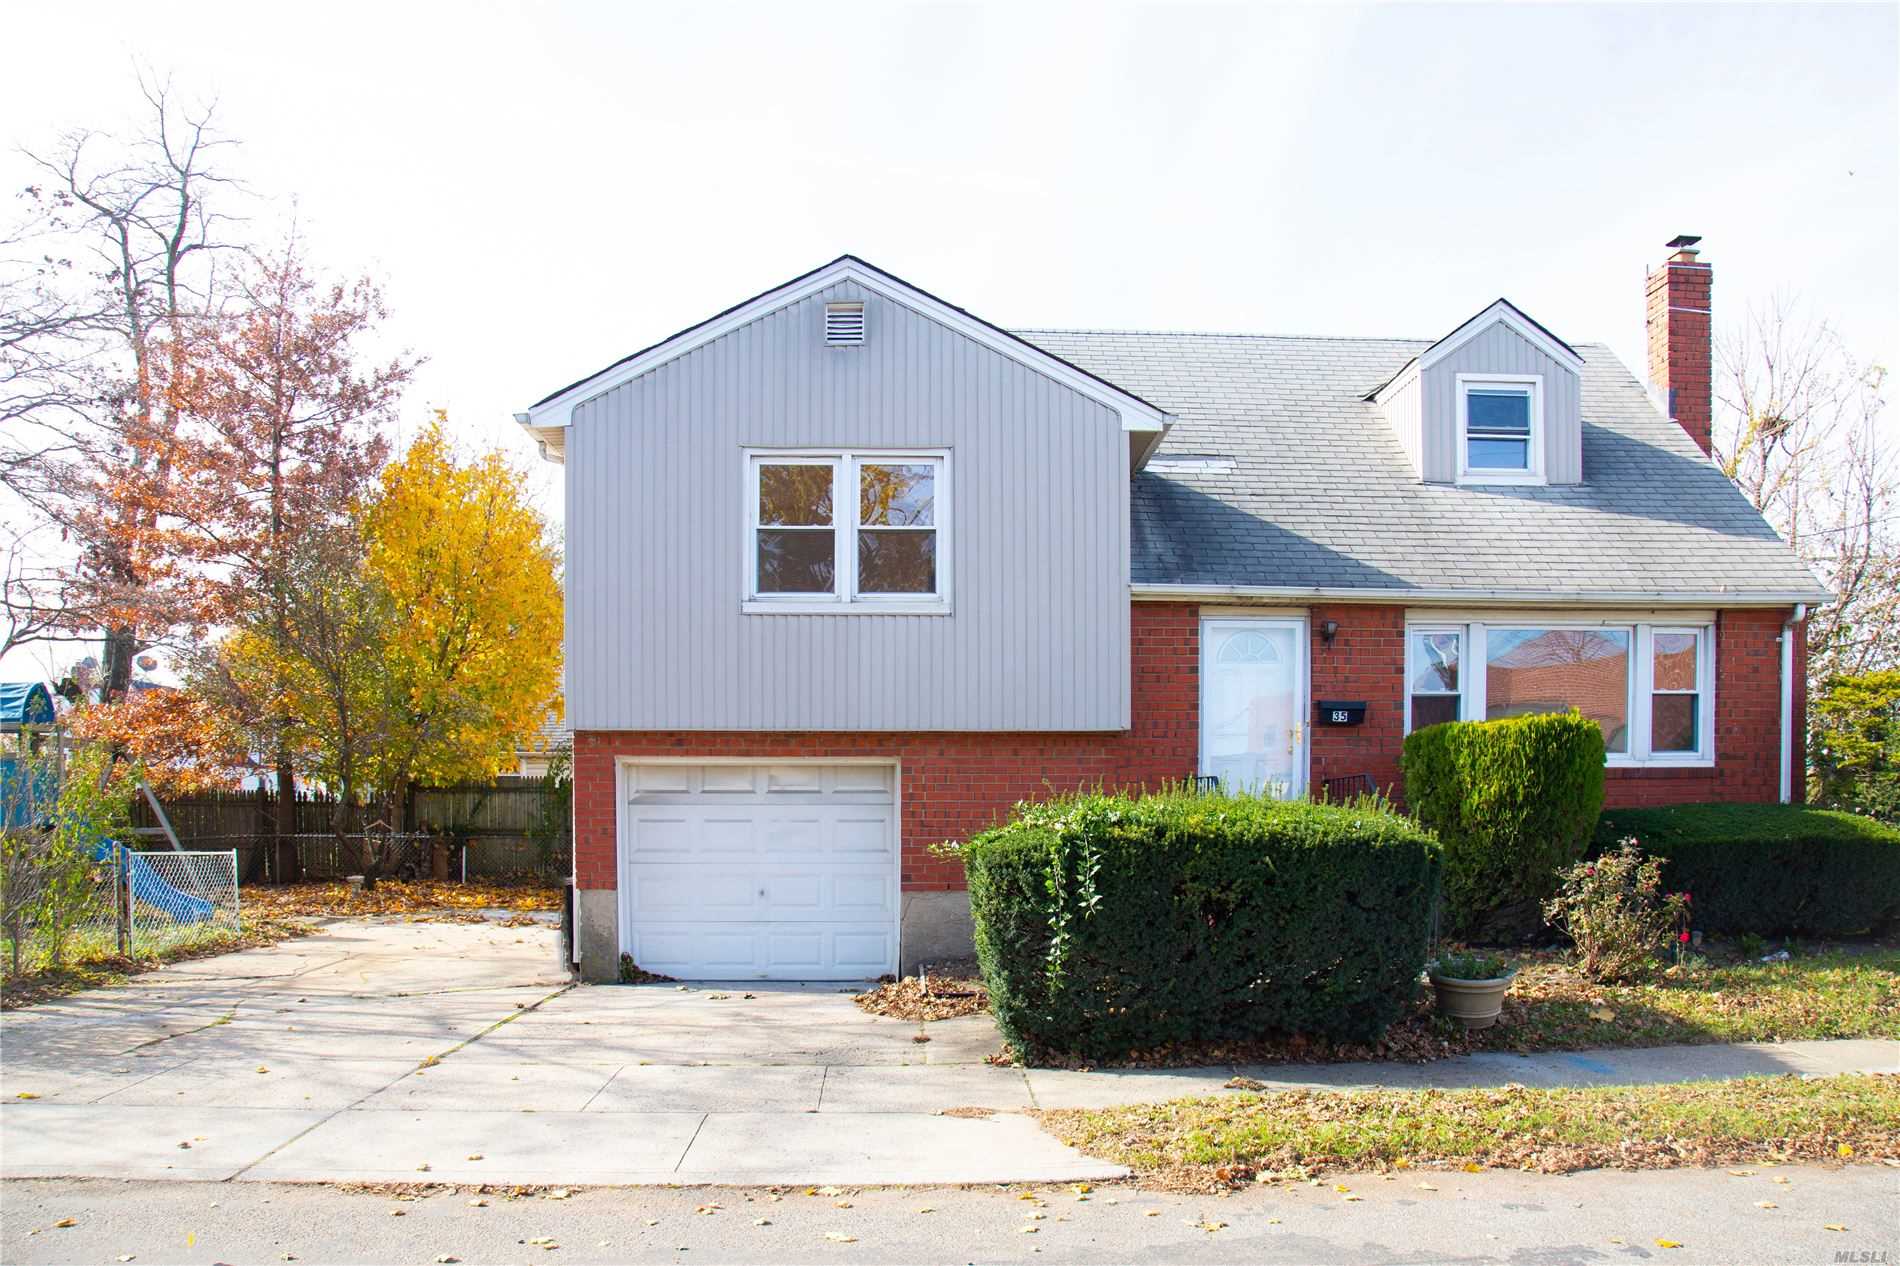 Welcome To This Move-in Ready Charming Split. Almost New, Totally Renovated, Bright, Spacious, Open Floor Plan, Attached garage, Lot Of Storage. Convenient location, Close to transportation and shopping!! Close to LIRR. Come See It Today Before It's Gone!!